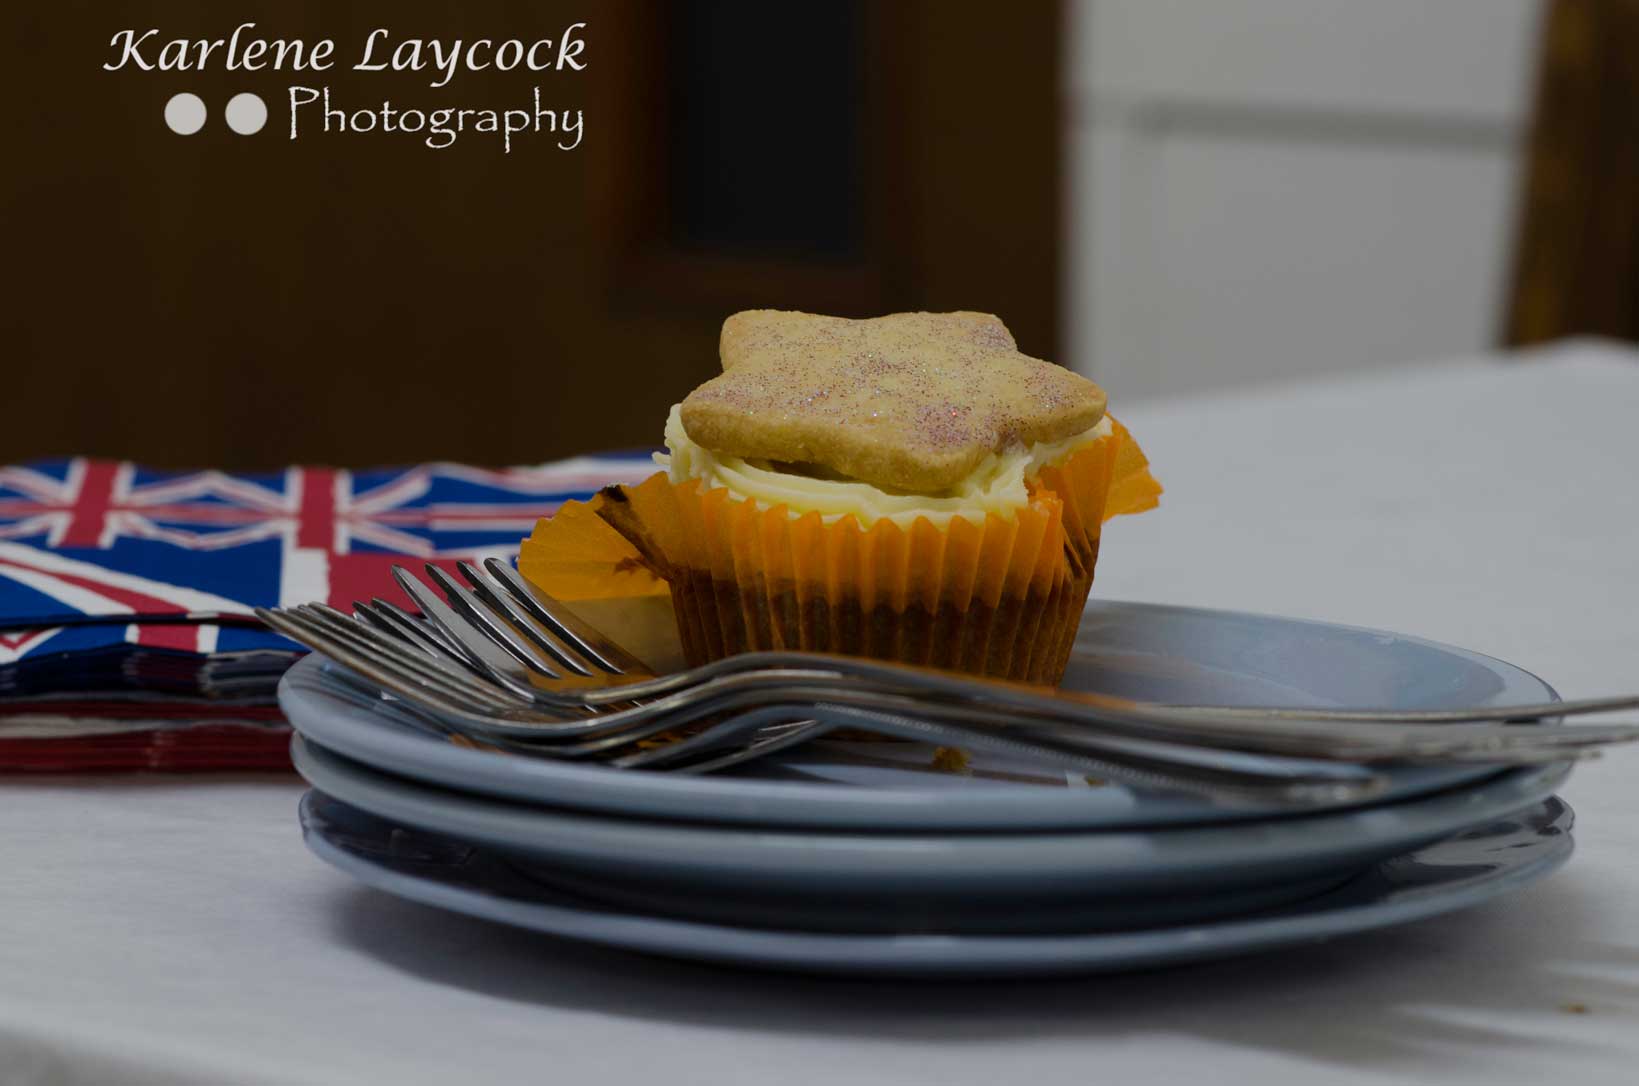 Photograph of Cupcake Topped with a Star Shaped Biscuit taken at a Local Bake Off Event